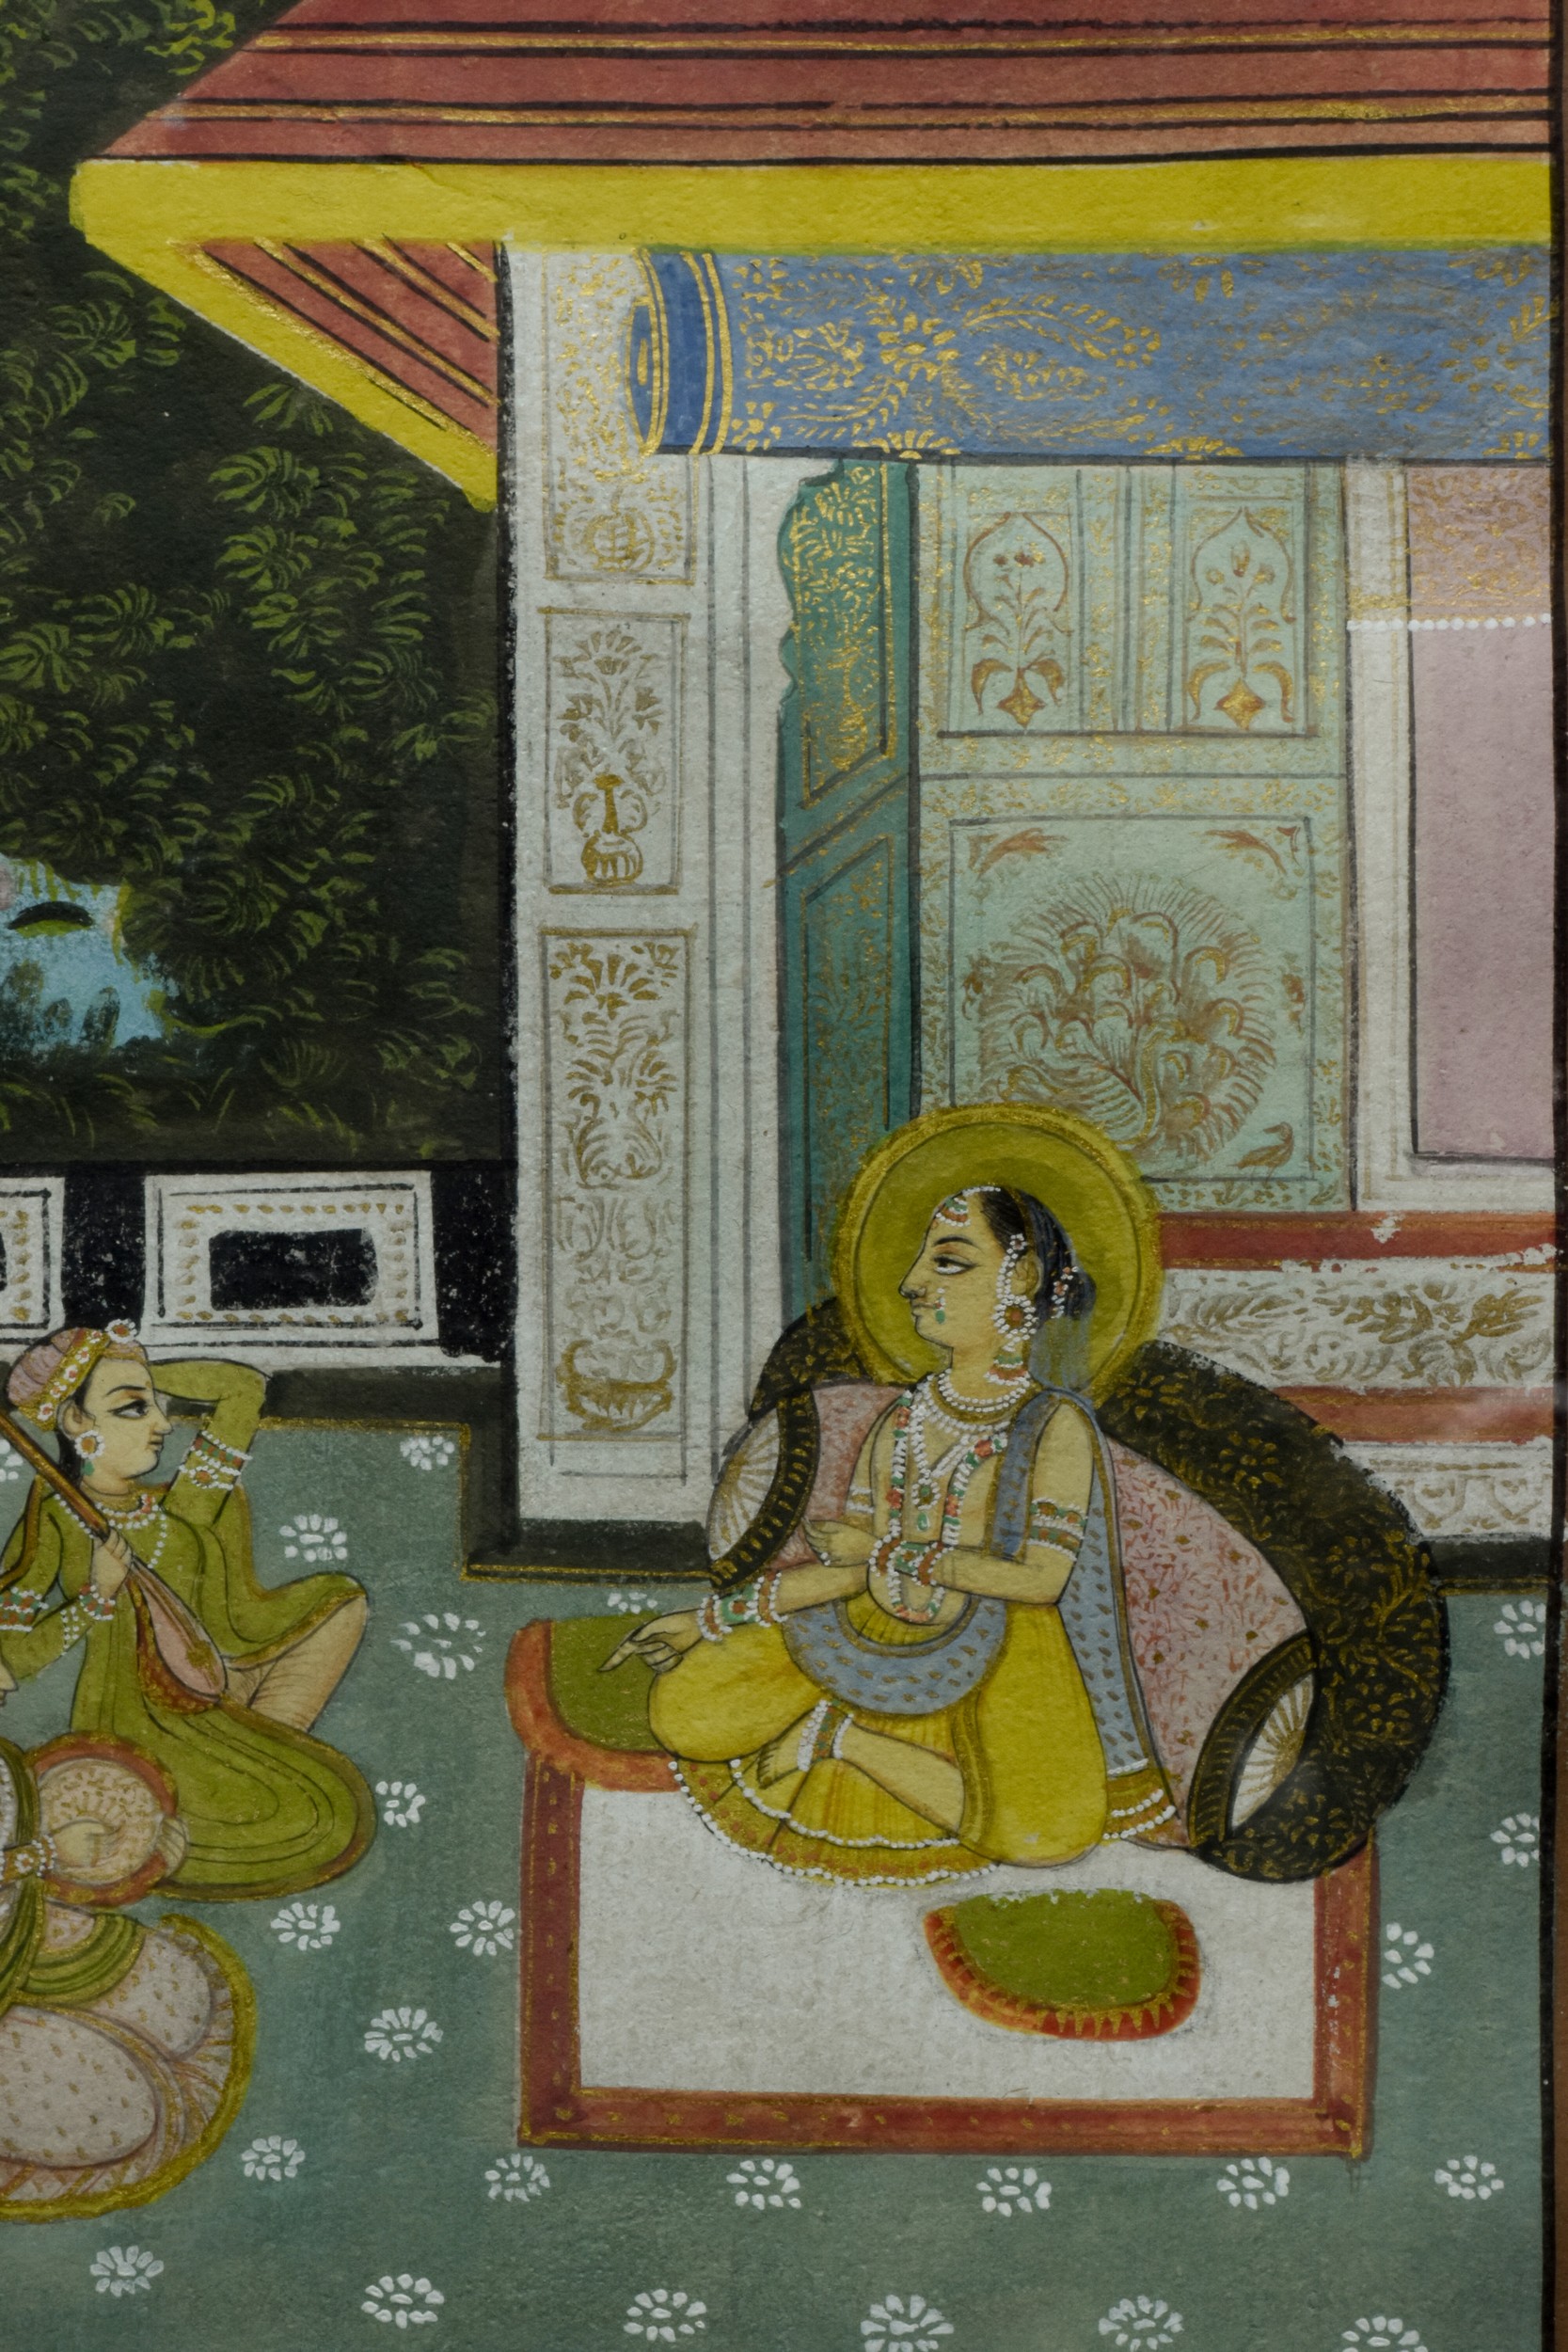 MAHARANI LISTENING TO TWO FEMALE MUSICIANS - Image 3 of 4